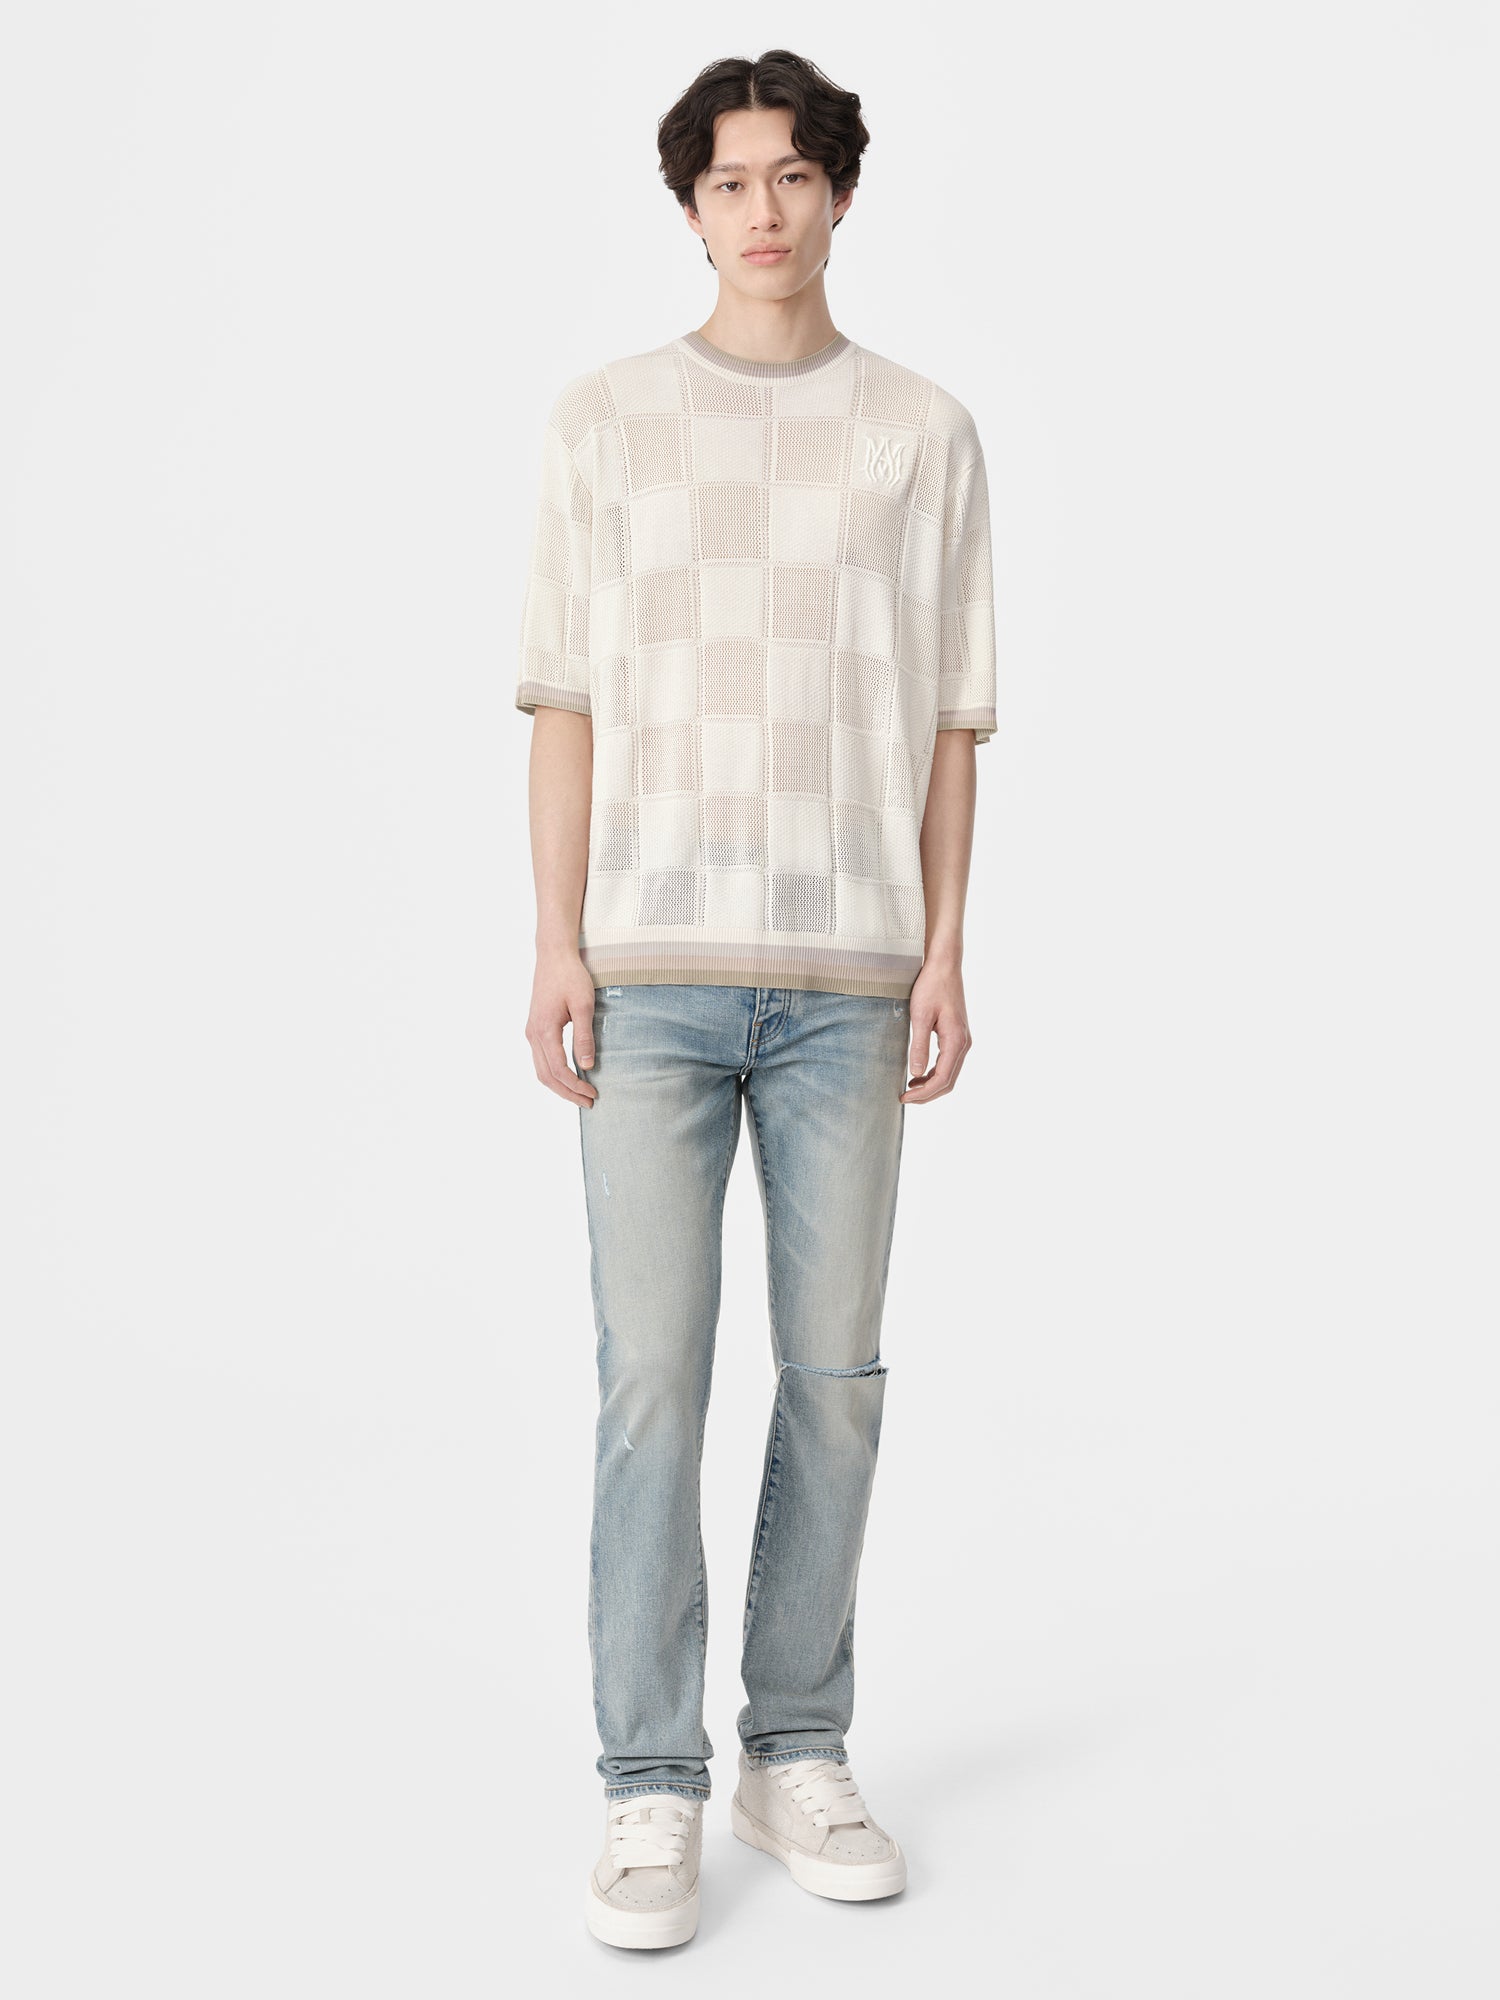 Product MA CHECKERED TEE - Birch featured image